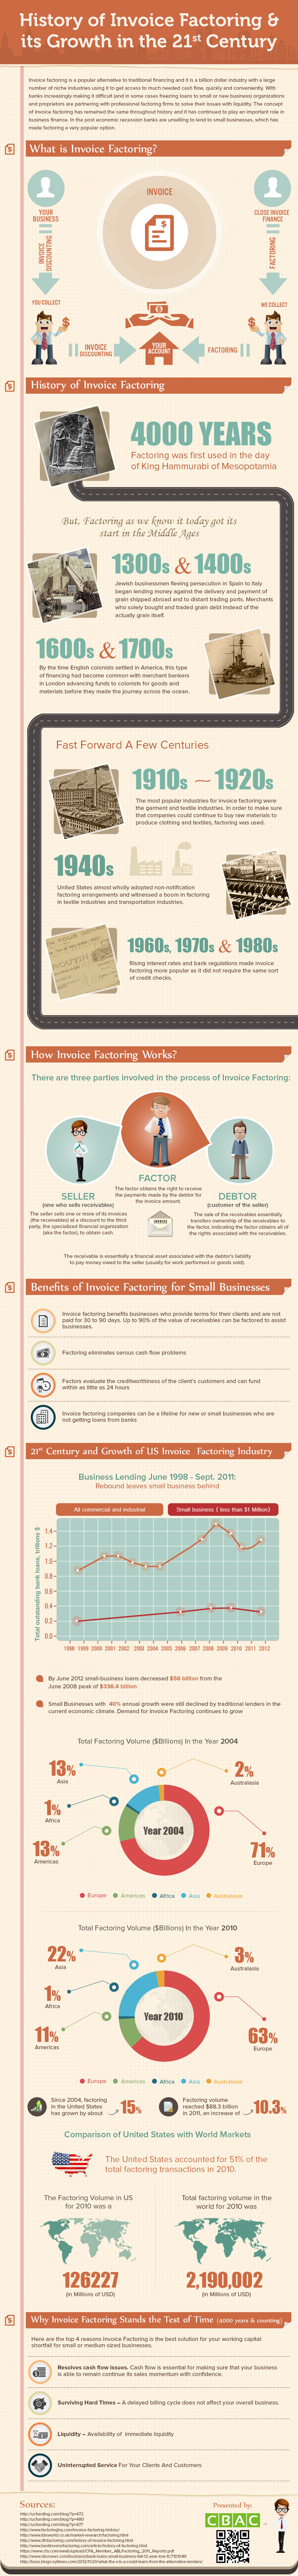 The History of Invoice Factoring and Growth during the 21st Century.